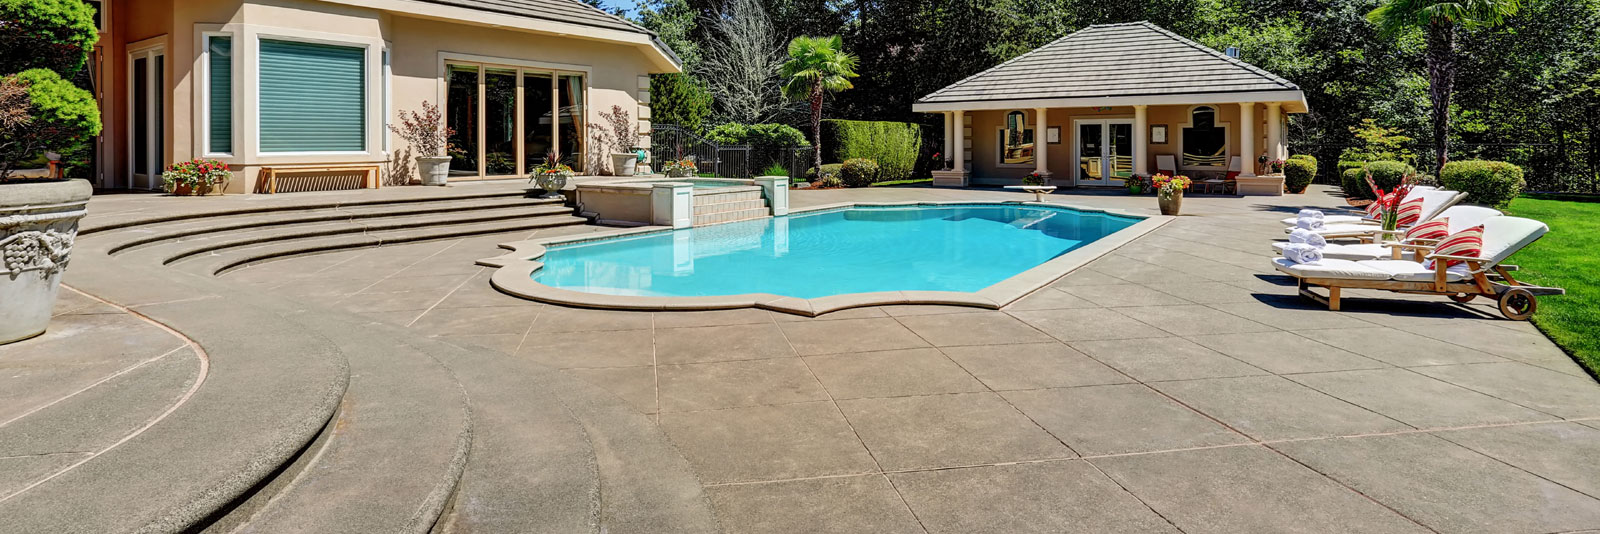 beautifully clean power washed pool and pool deck